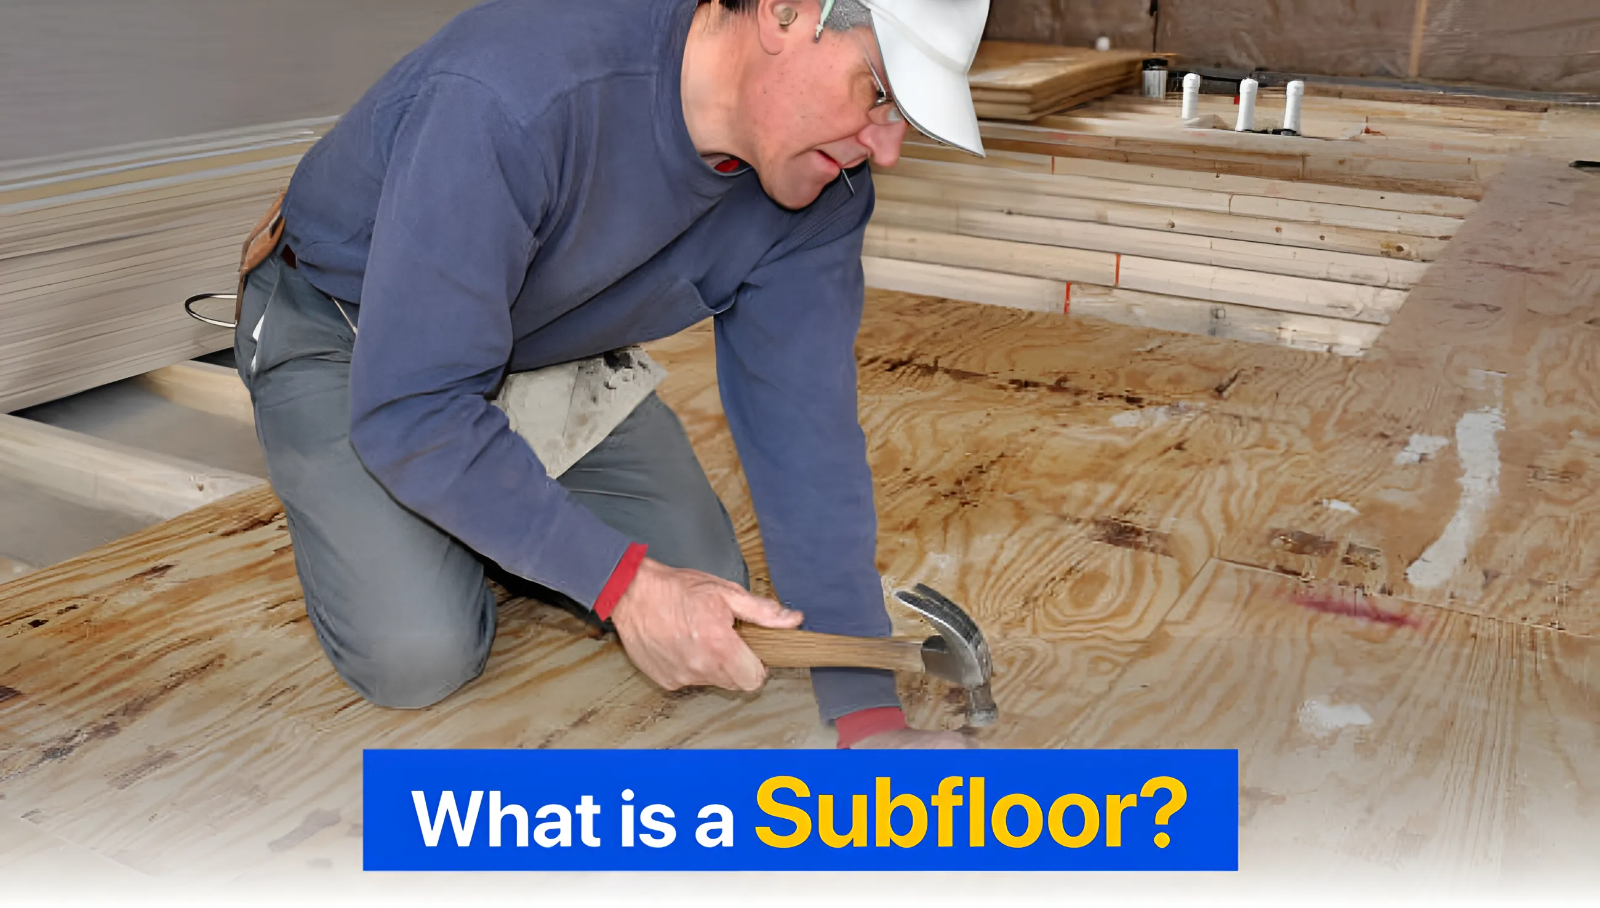 What is a Subfloor?